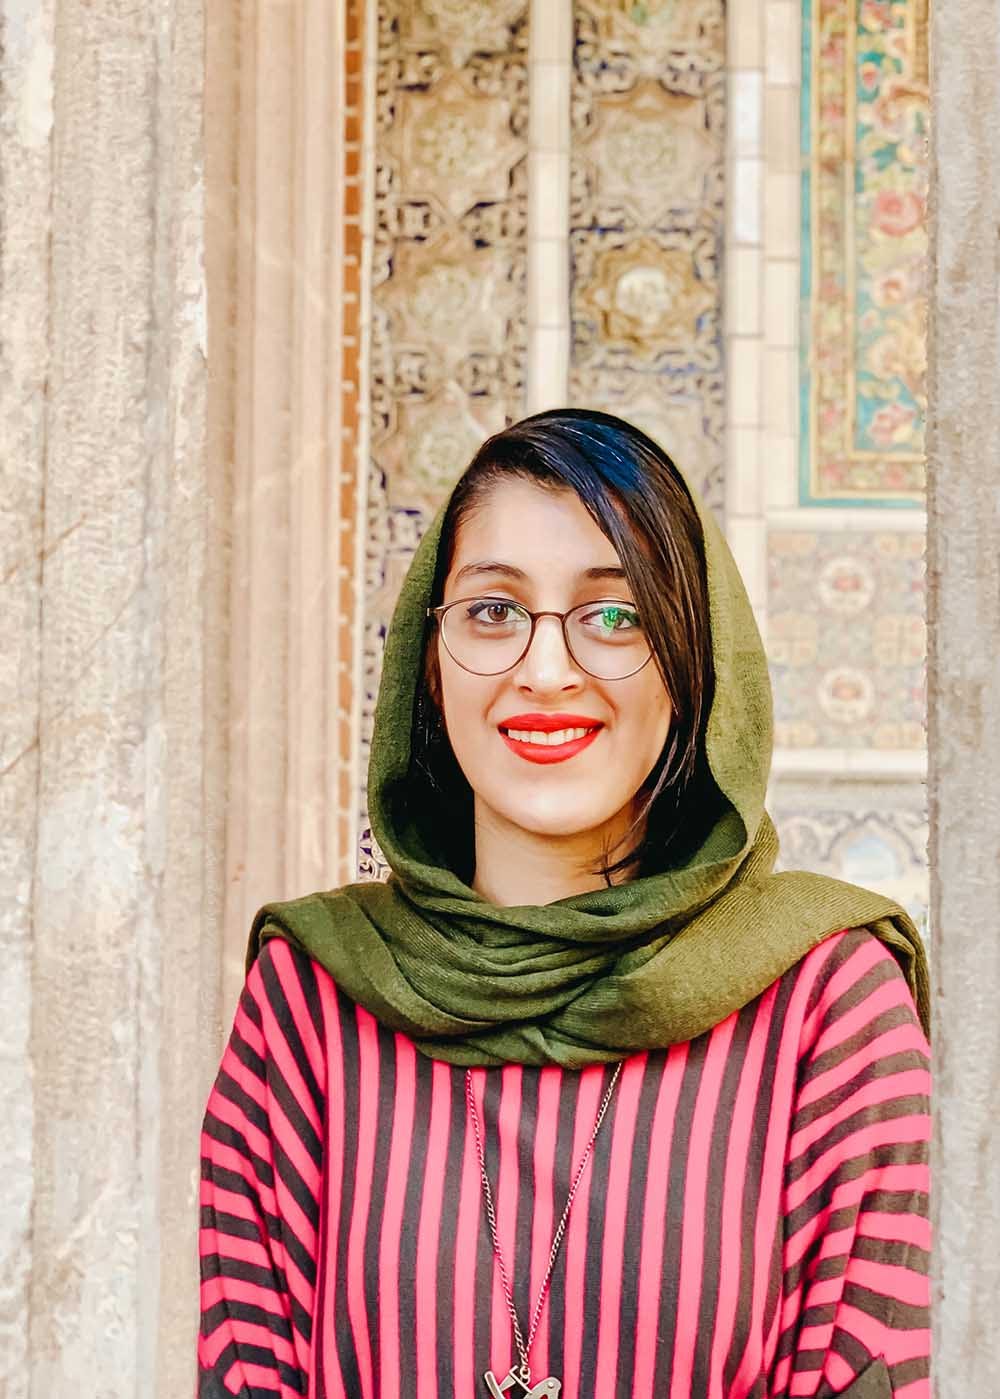 An Iranian girl with a scarf smiling in front of a historical wall.